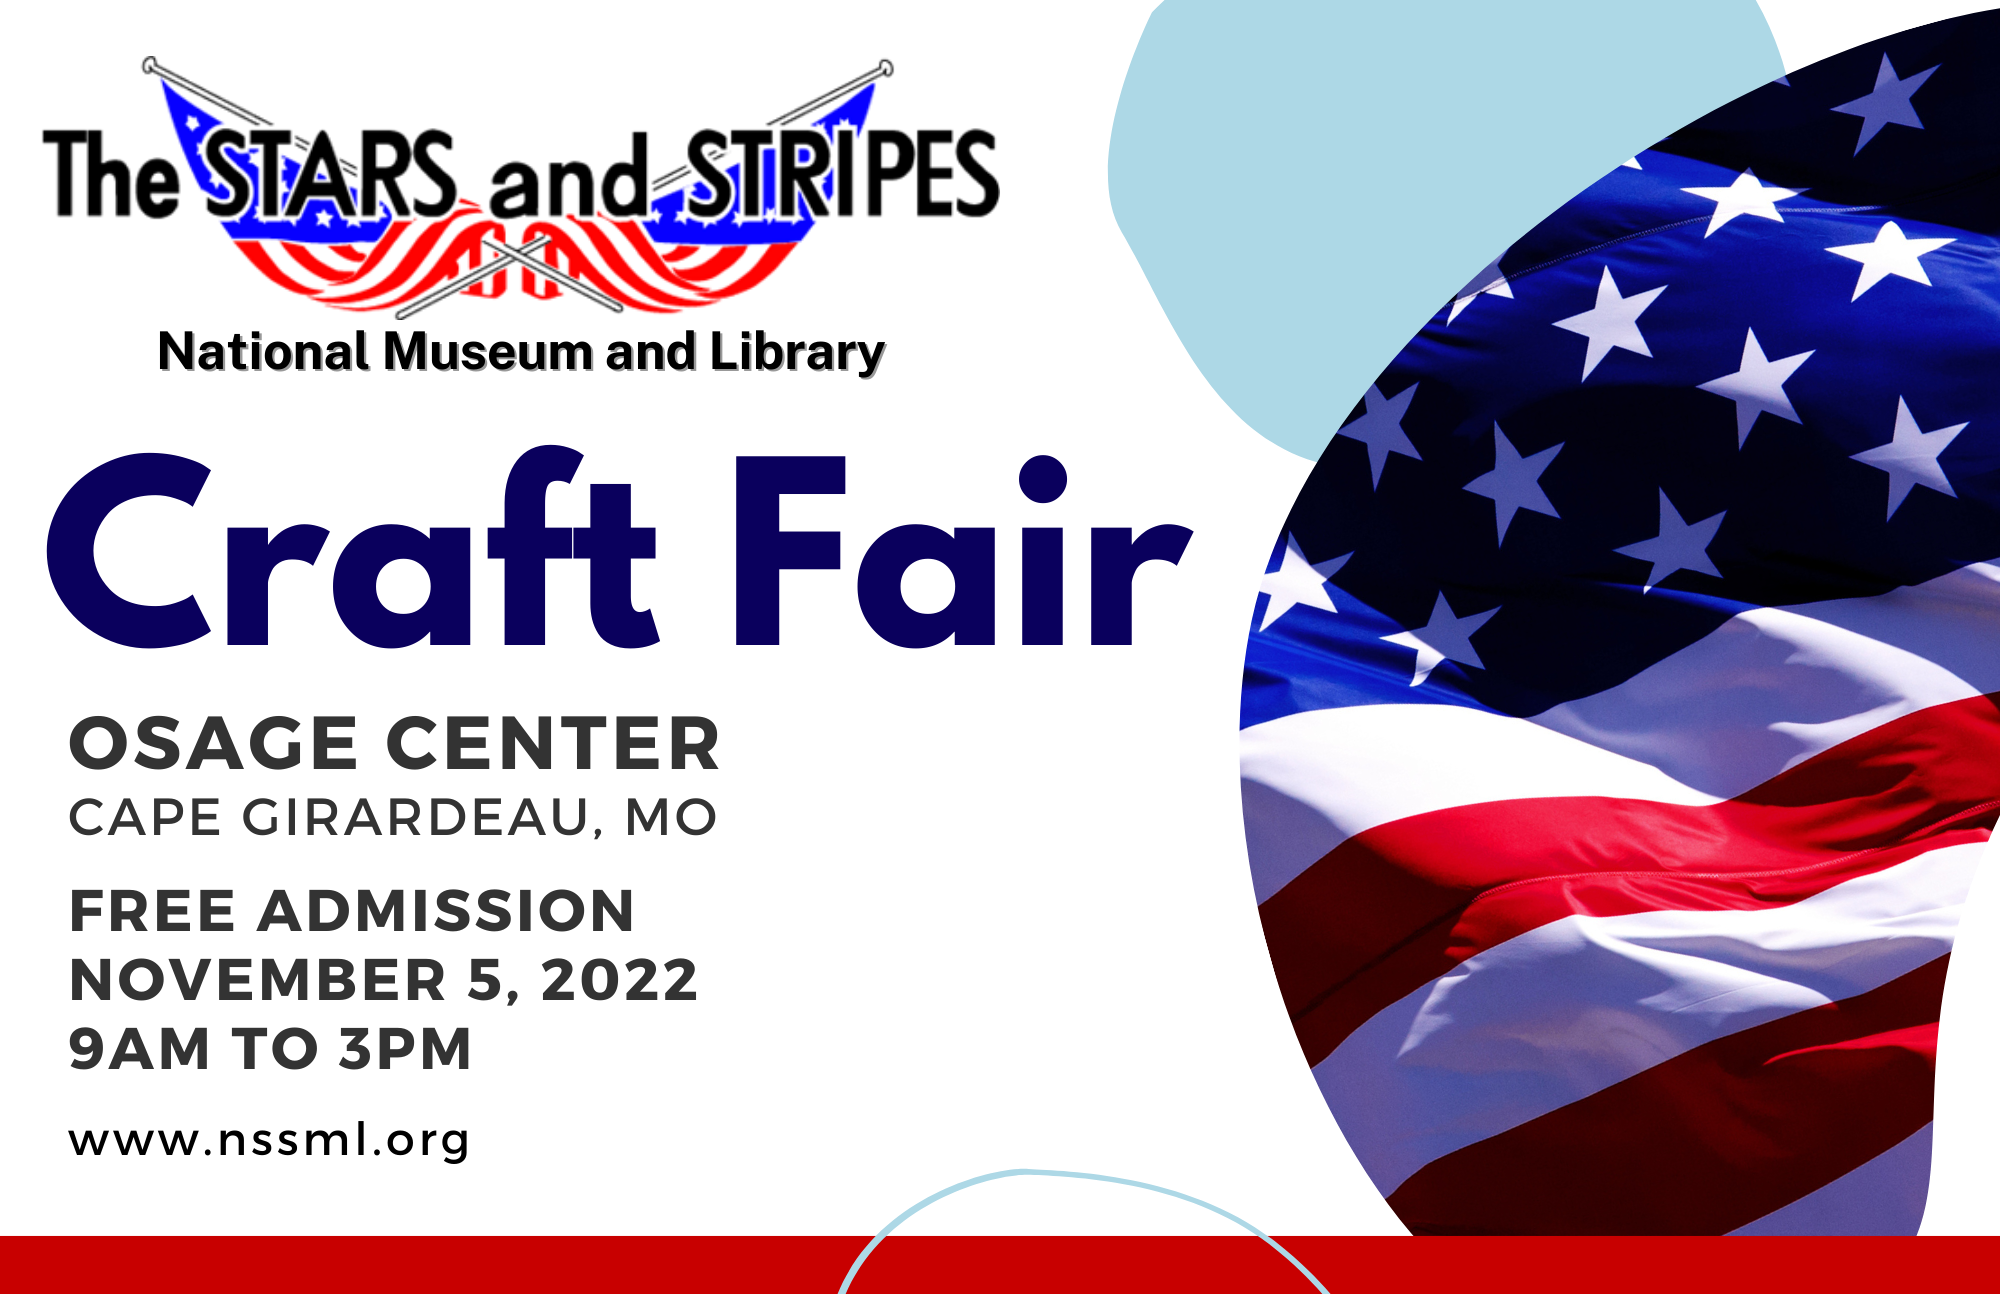 The Stars and Stripes Museum and Library's 2nd Annual Craft Fair will be held on Saturday, November 5, 2022 from 9am to 3pm at the Osage Center in Cape Girardeau. Admission is free.